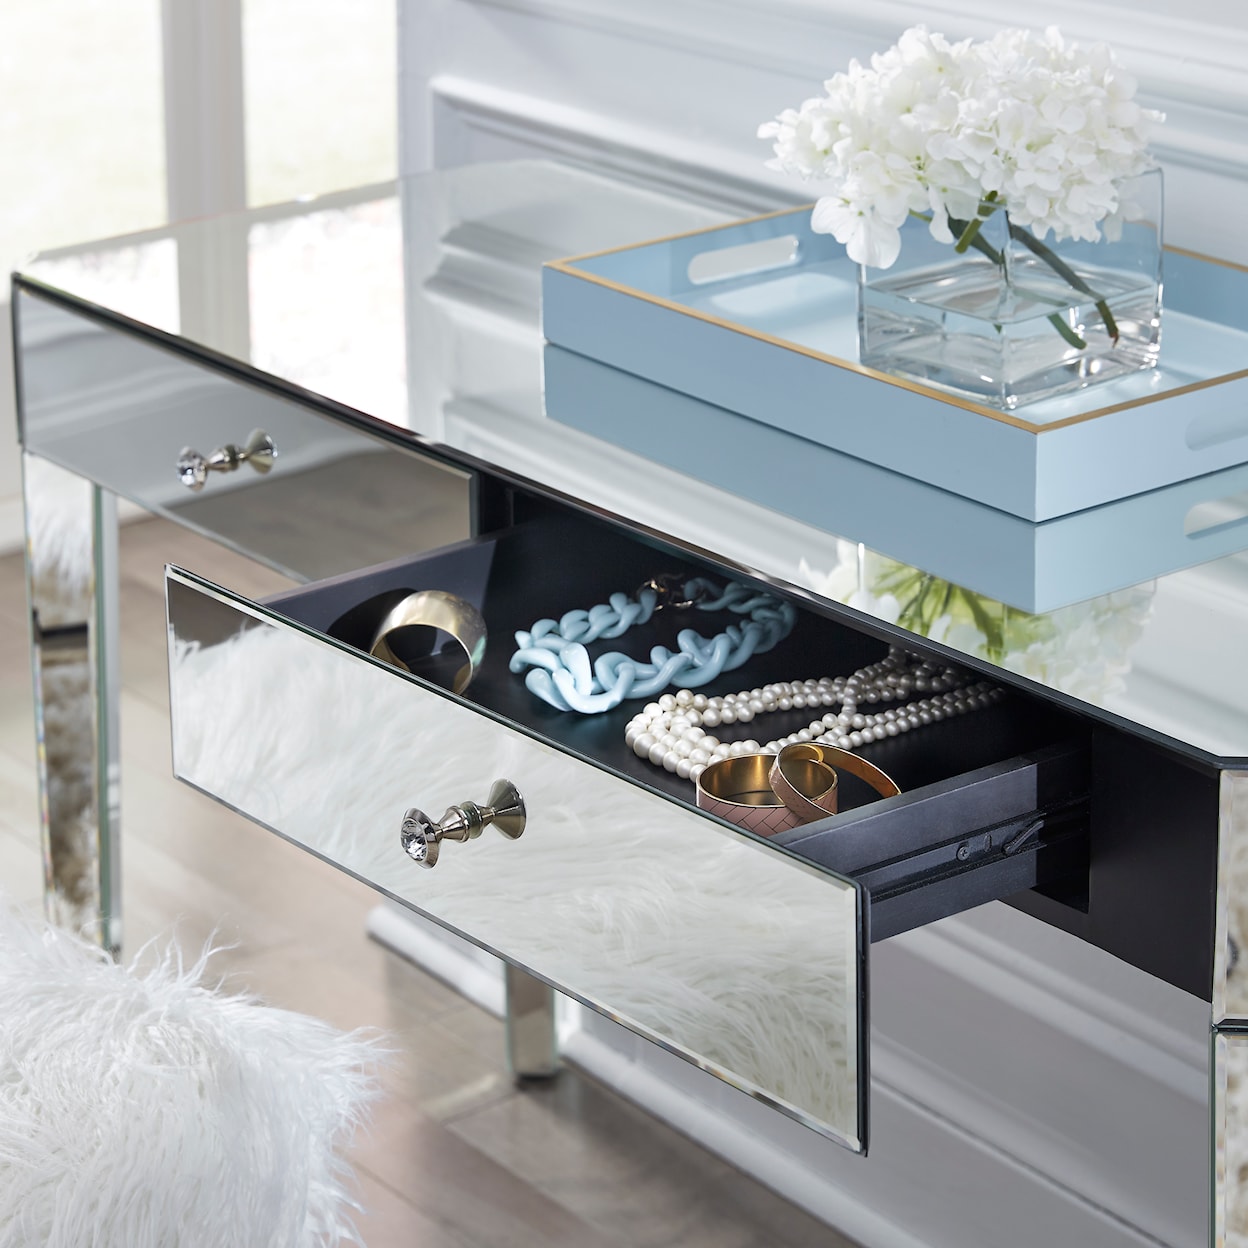 Accentrics Home Accents Mirrored Two Drawer Desk